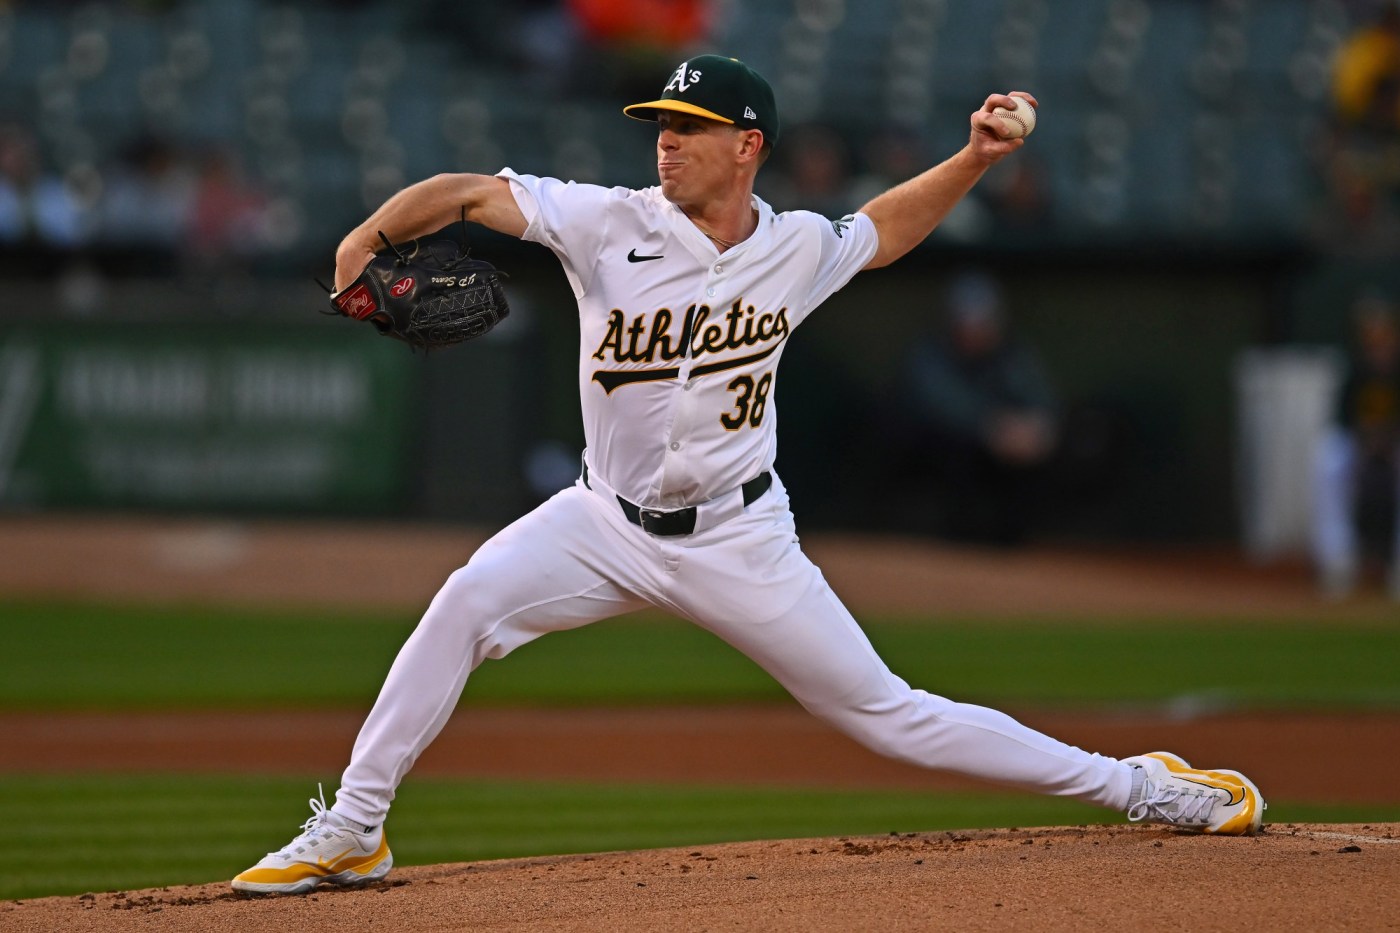 jp-sears-spins-quality-start-as-a’s-win-fifth-straight-game